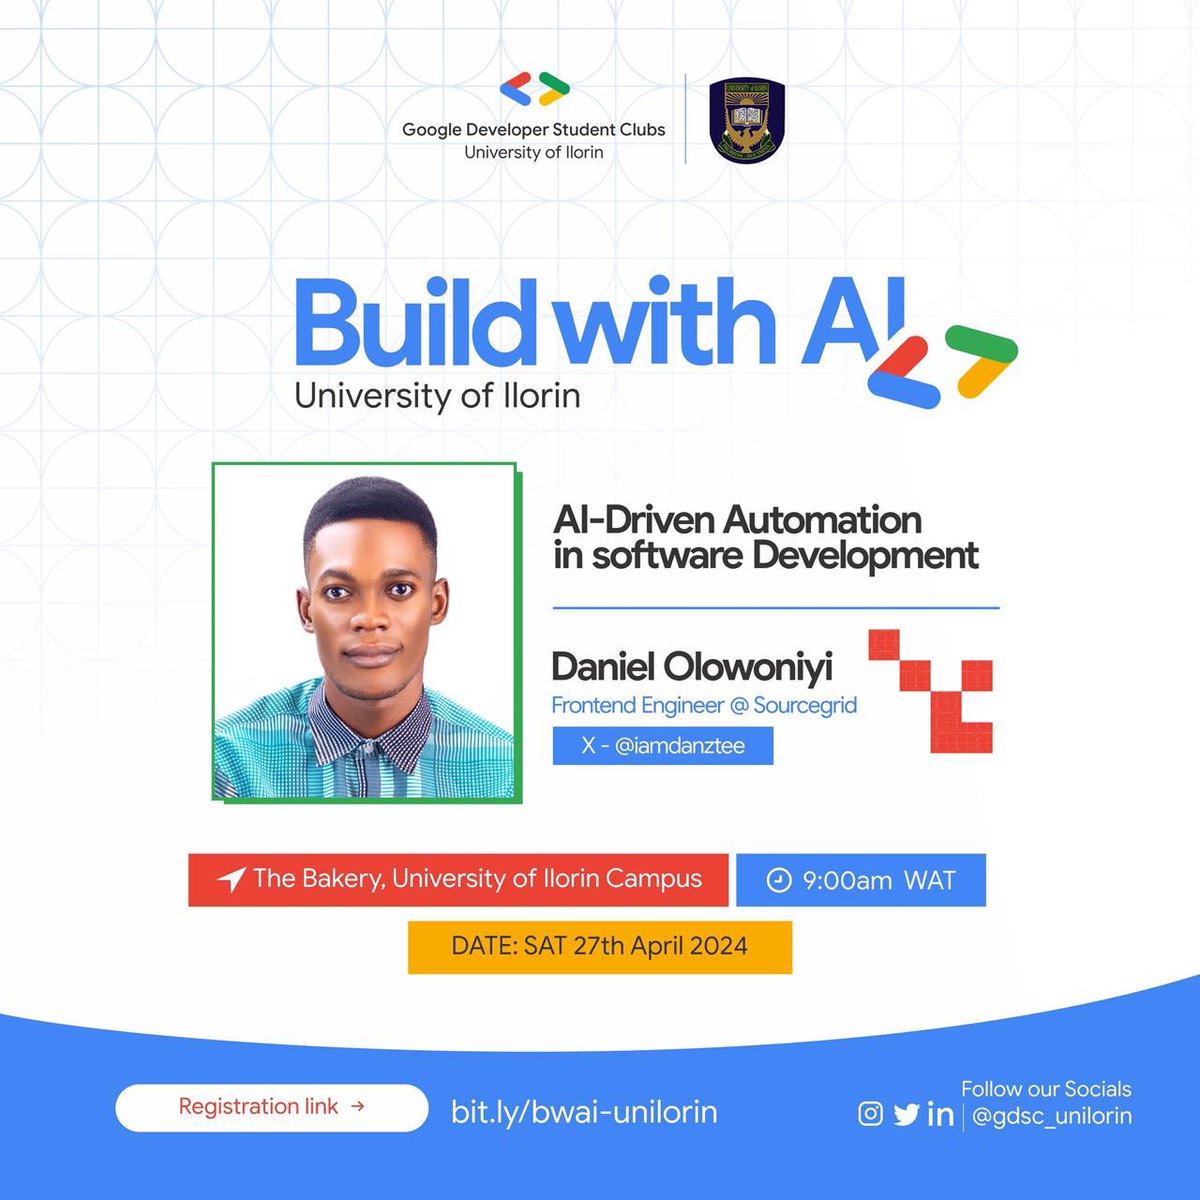 Daniel Olowoniyi, @iamdanztee Frontend Engineer at Sourcegrid, will delve into the world of AI-driven automation in software empowering developers to automate tedious tasks, and focus on the strategic aspects of building . Don’t miss out #BuildwithAI #BuildwithAIUnilorin